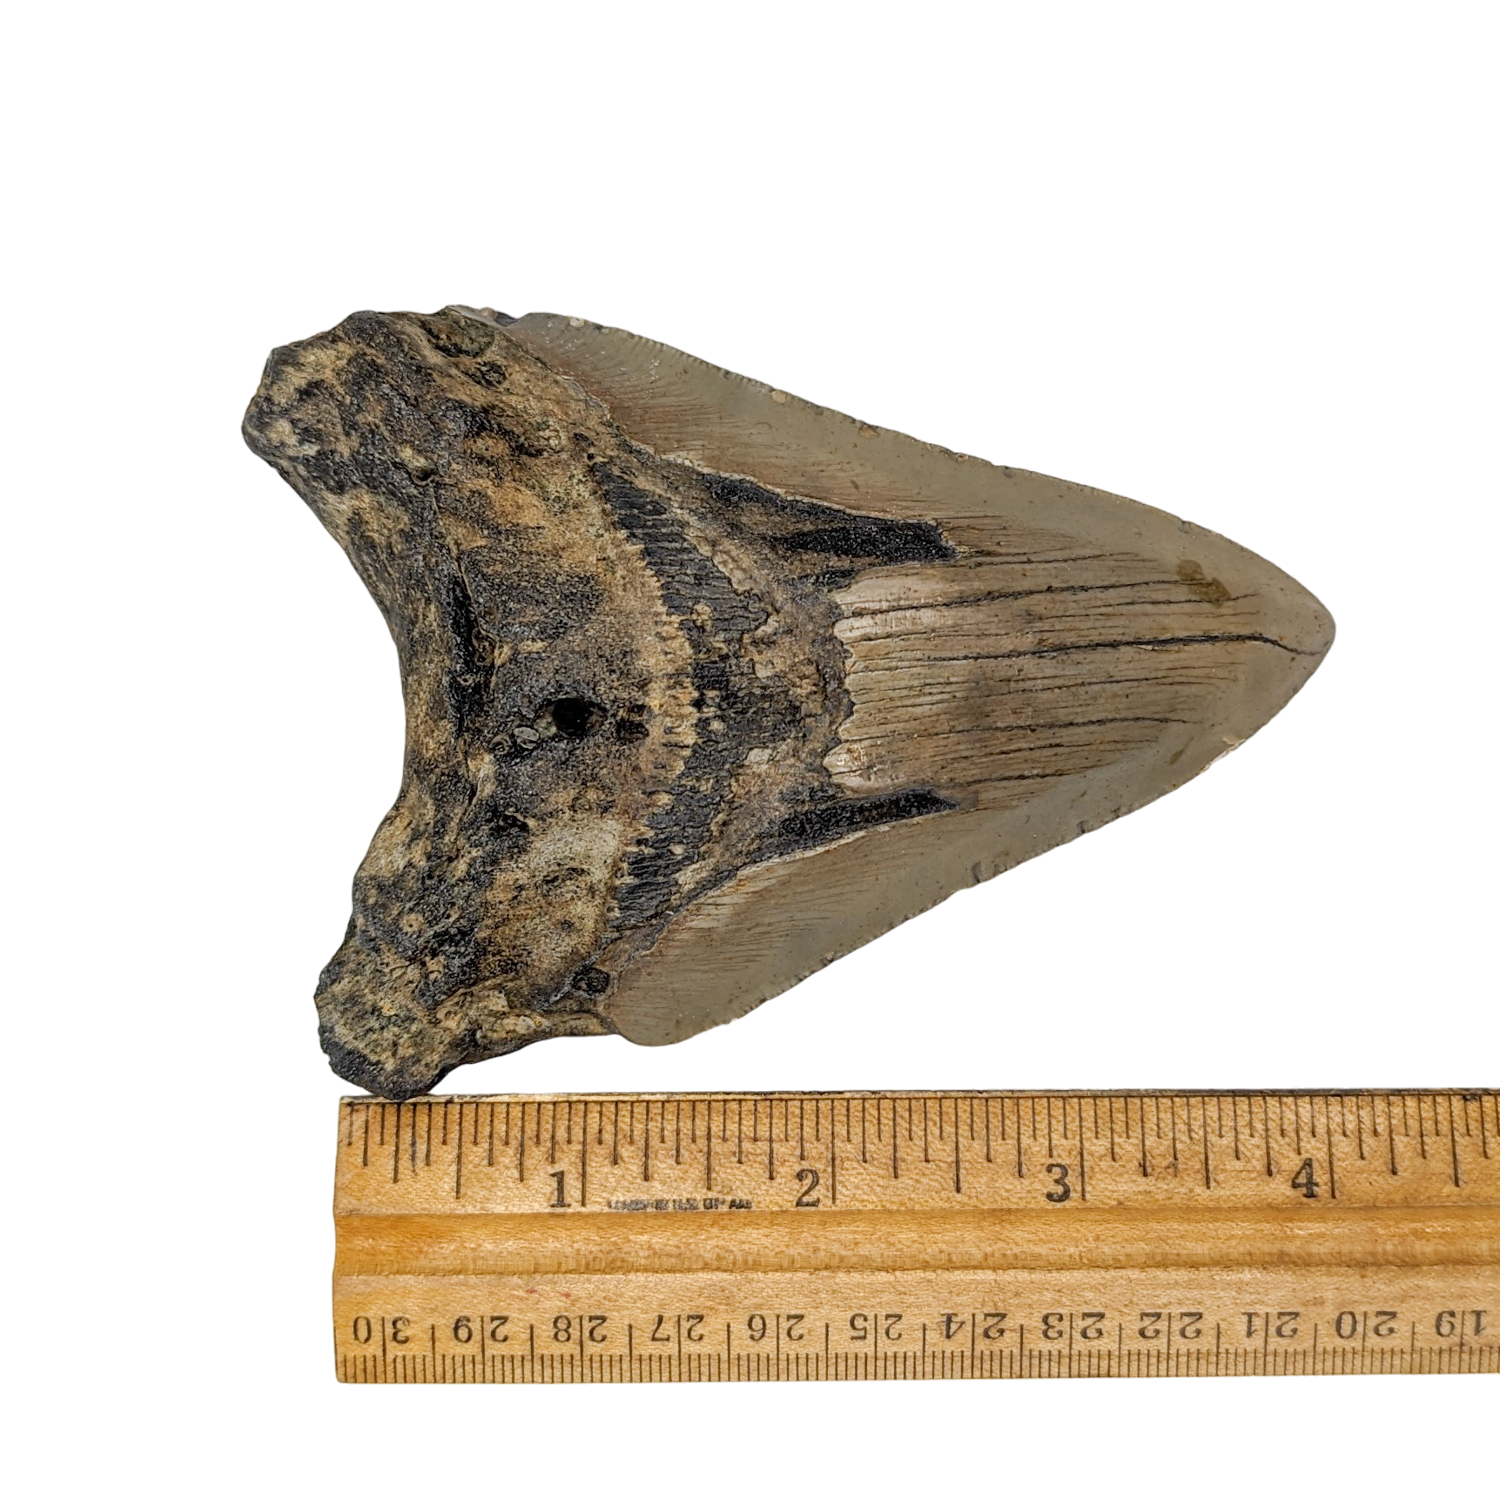 Authentic 4 1/2" Megalodon Shark Tooth Fossil